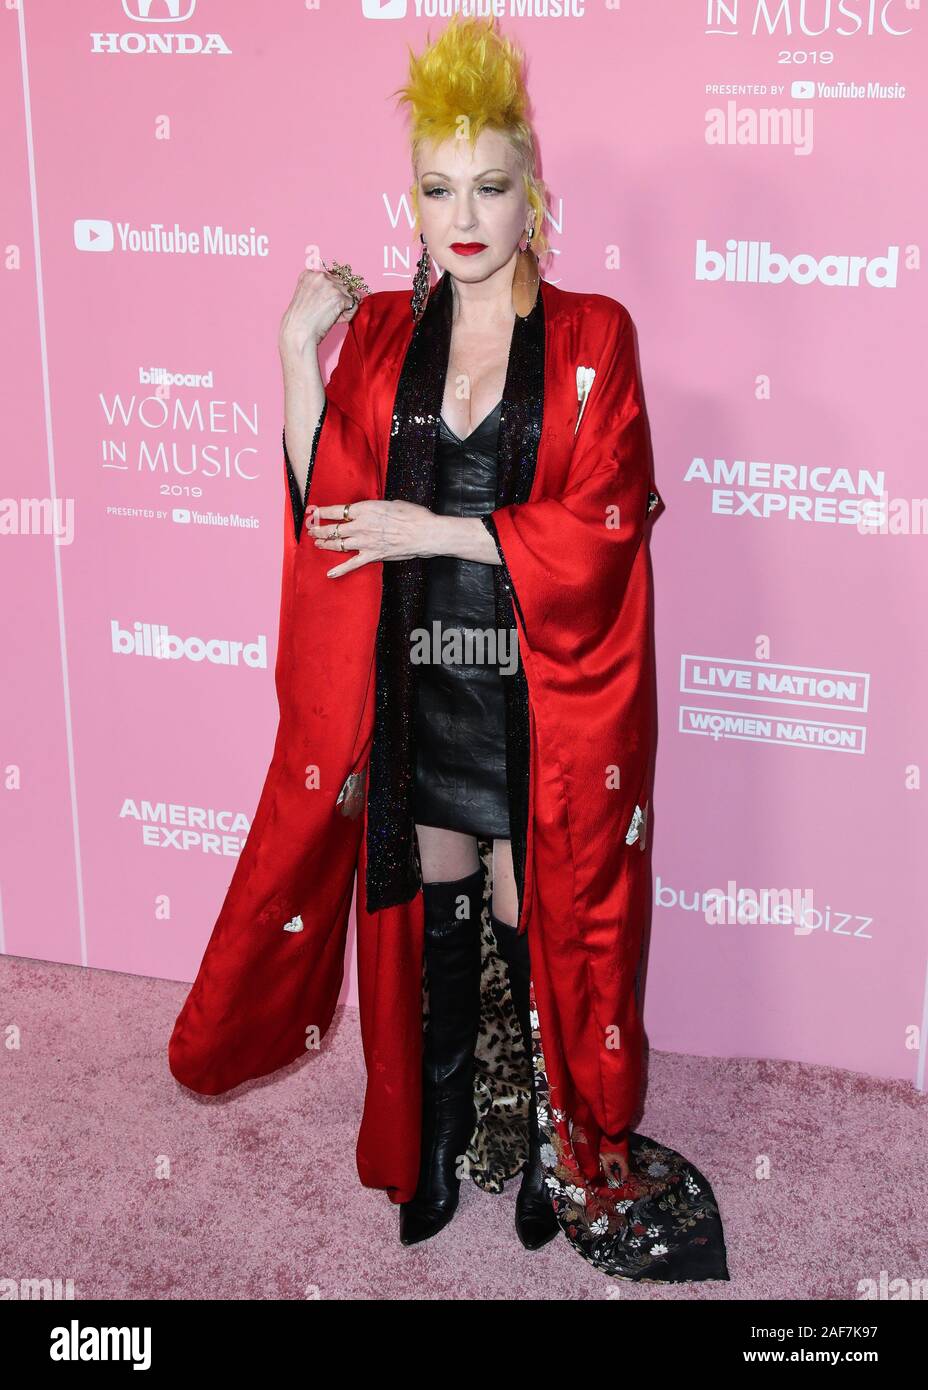 HOLLYWOOD, LOS ANGELES, CALIFORNIA, USA - DECEMBER 12: Singer Cyndi Lauper  arrives at the 2019 Billboard Women In Music Presented By YouTube Music  held at the Hollywood Palladium on December 12, 2019